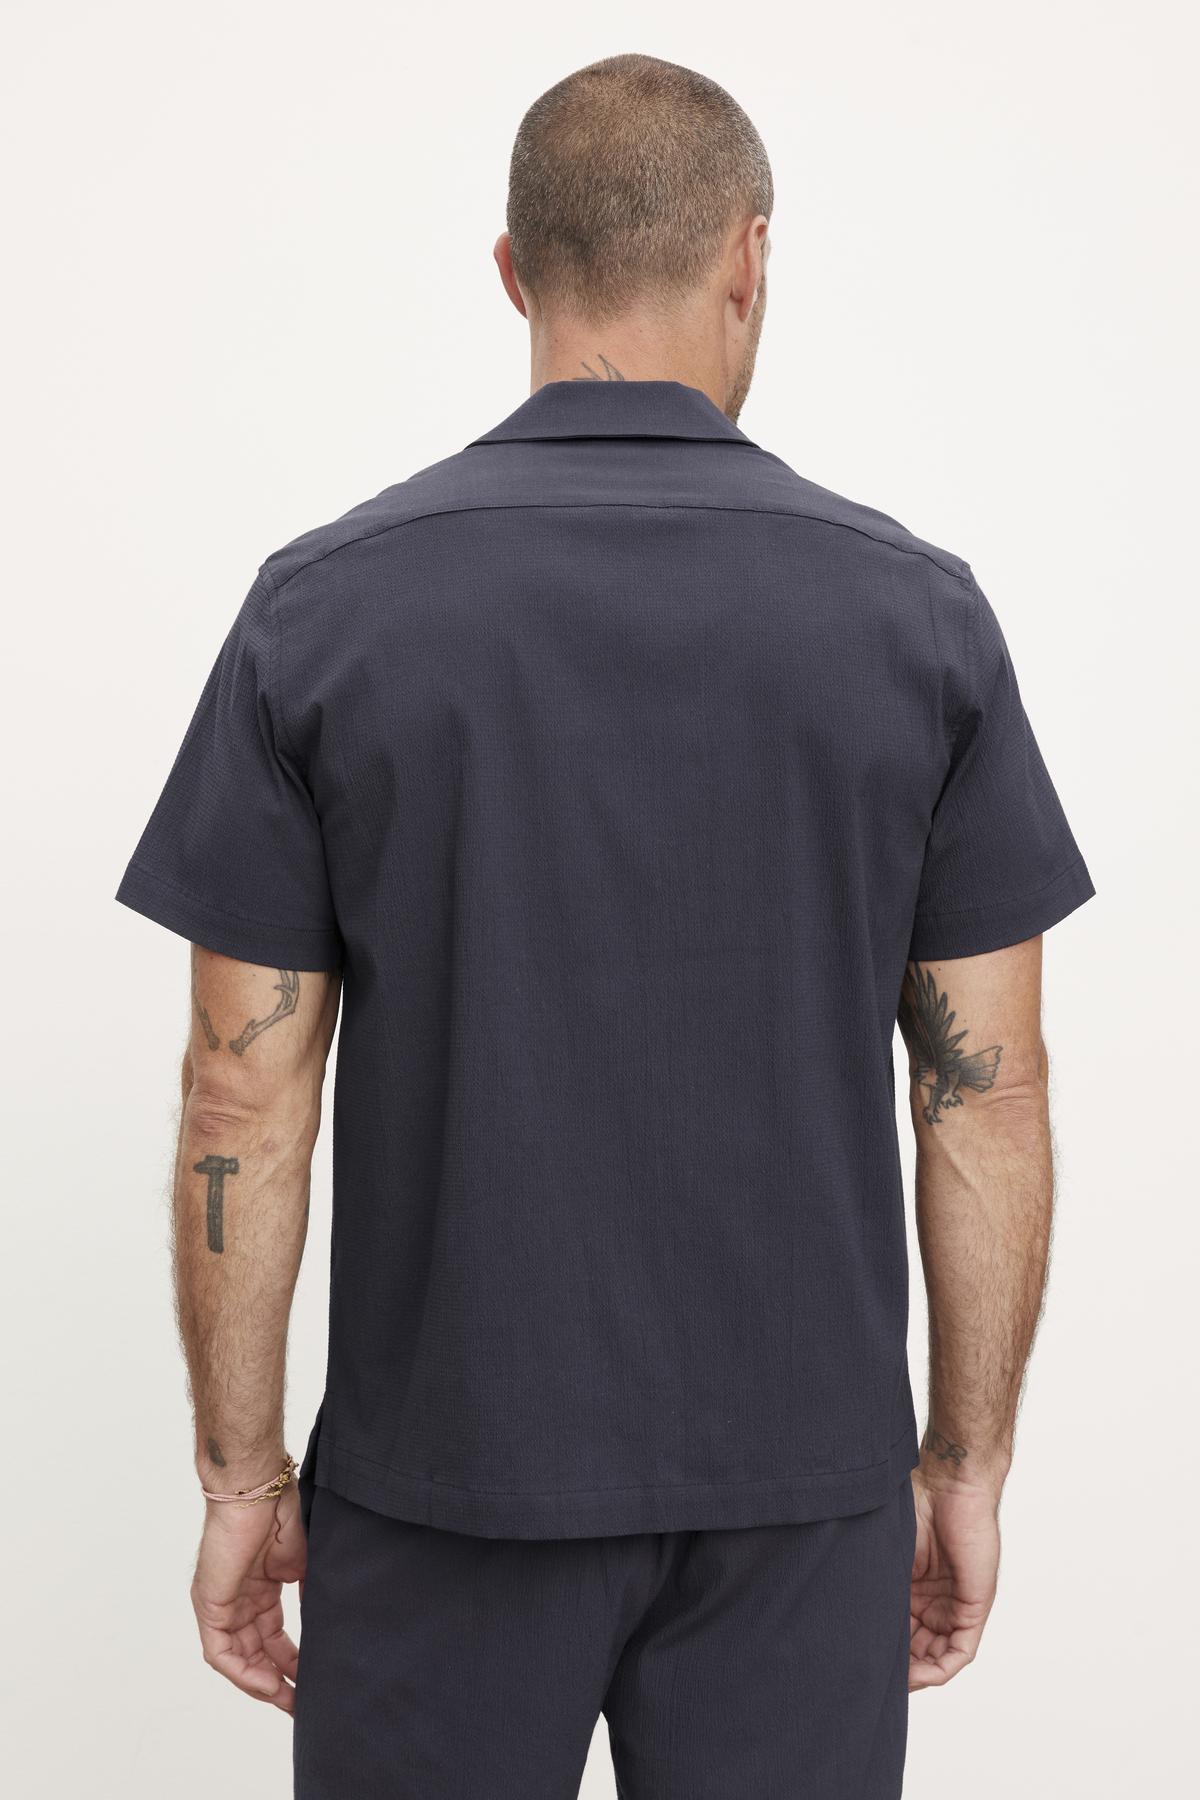 Rear view of a man wearing a dark grey short-sleeved seersucker cotton Velvet by Graham & Spencer shirt and pants, showing tattoos on his arms.-36890699661505